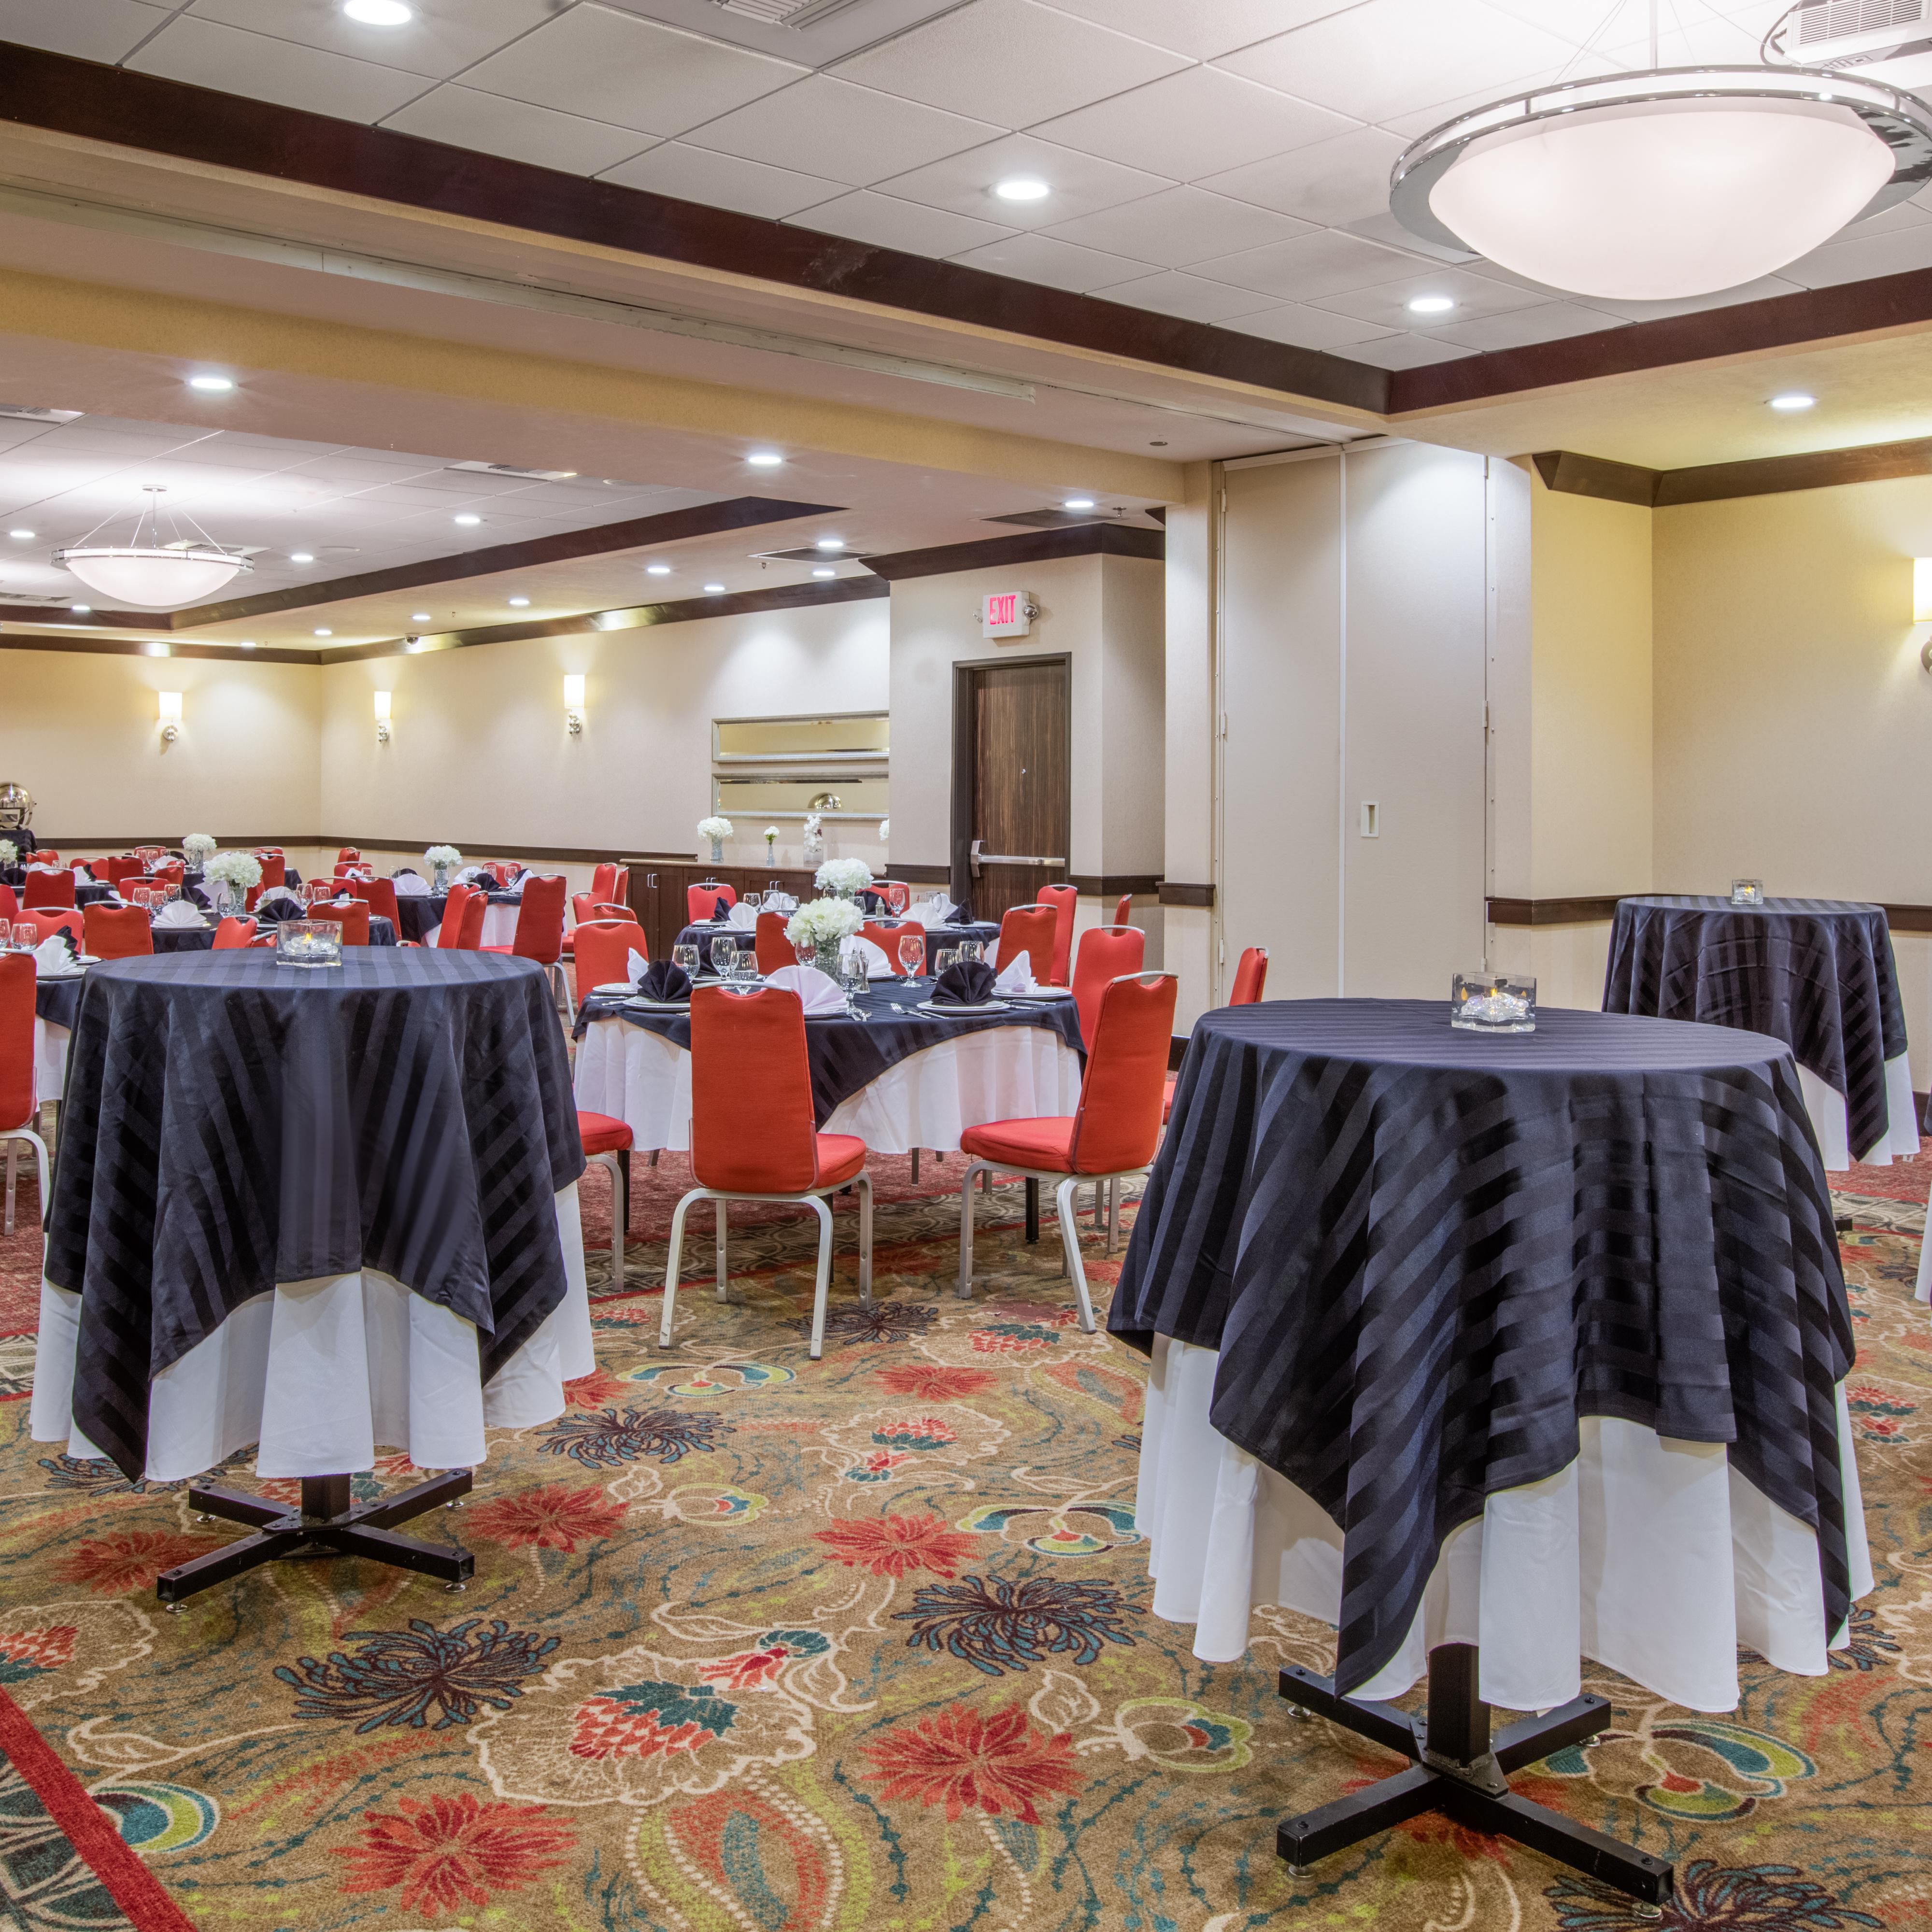 Our ballroom space is customizable to suit your event needs